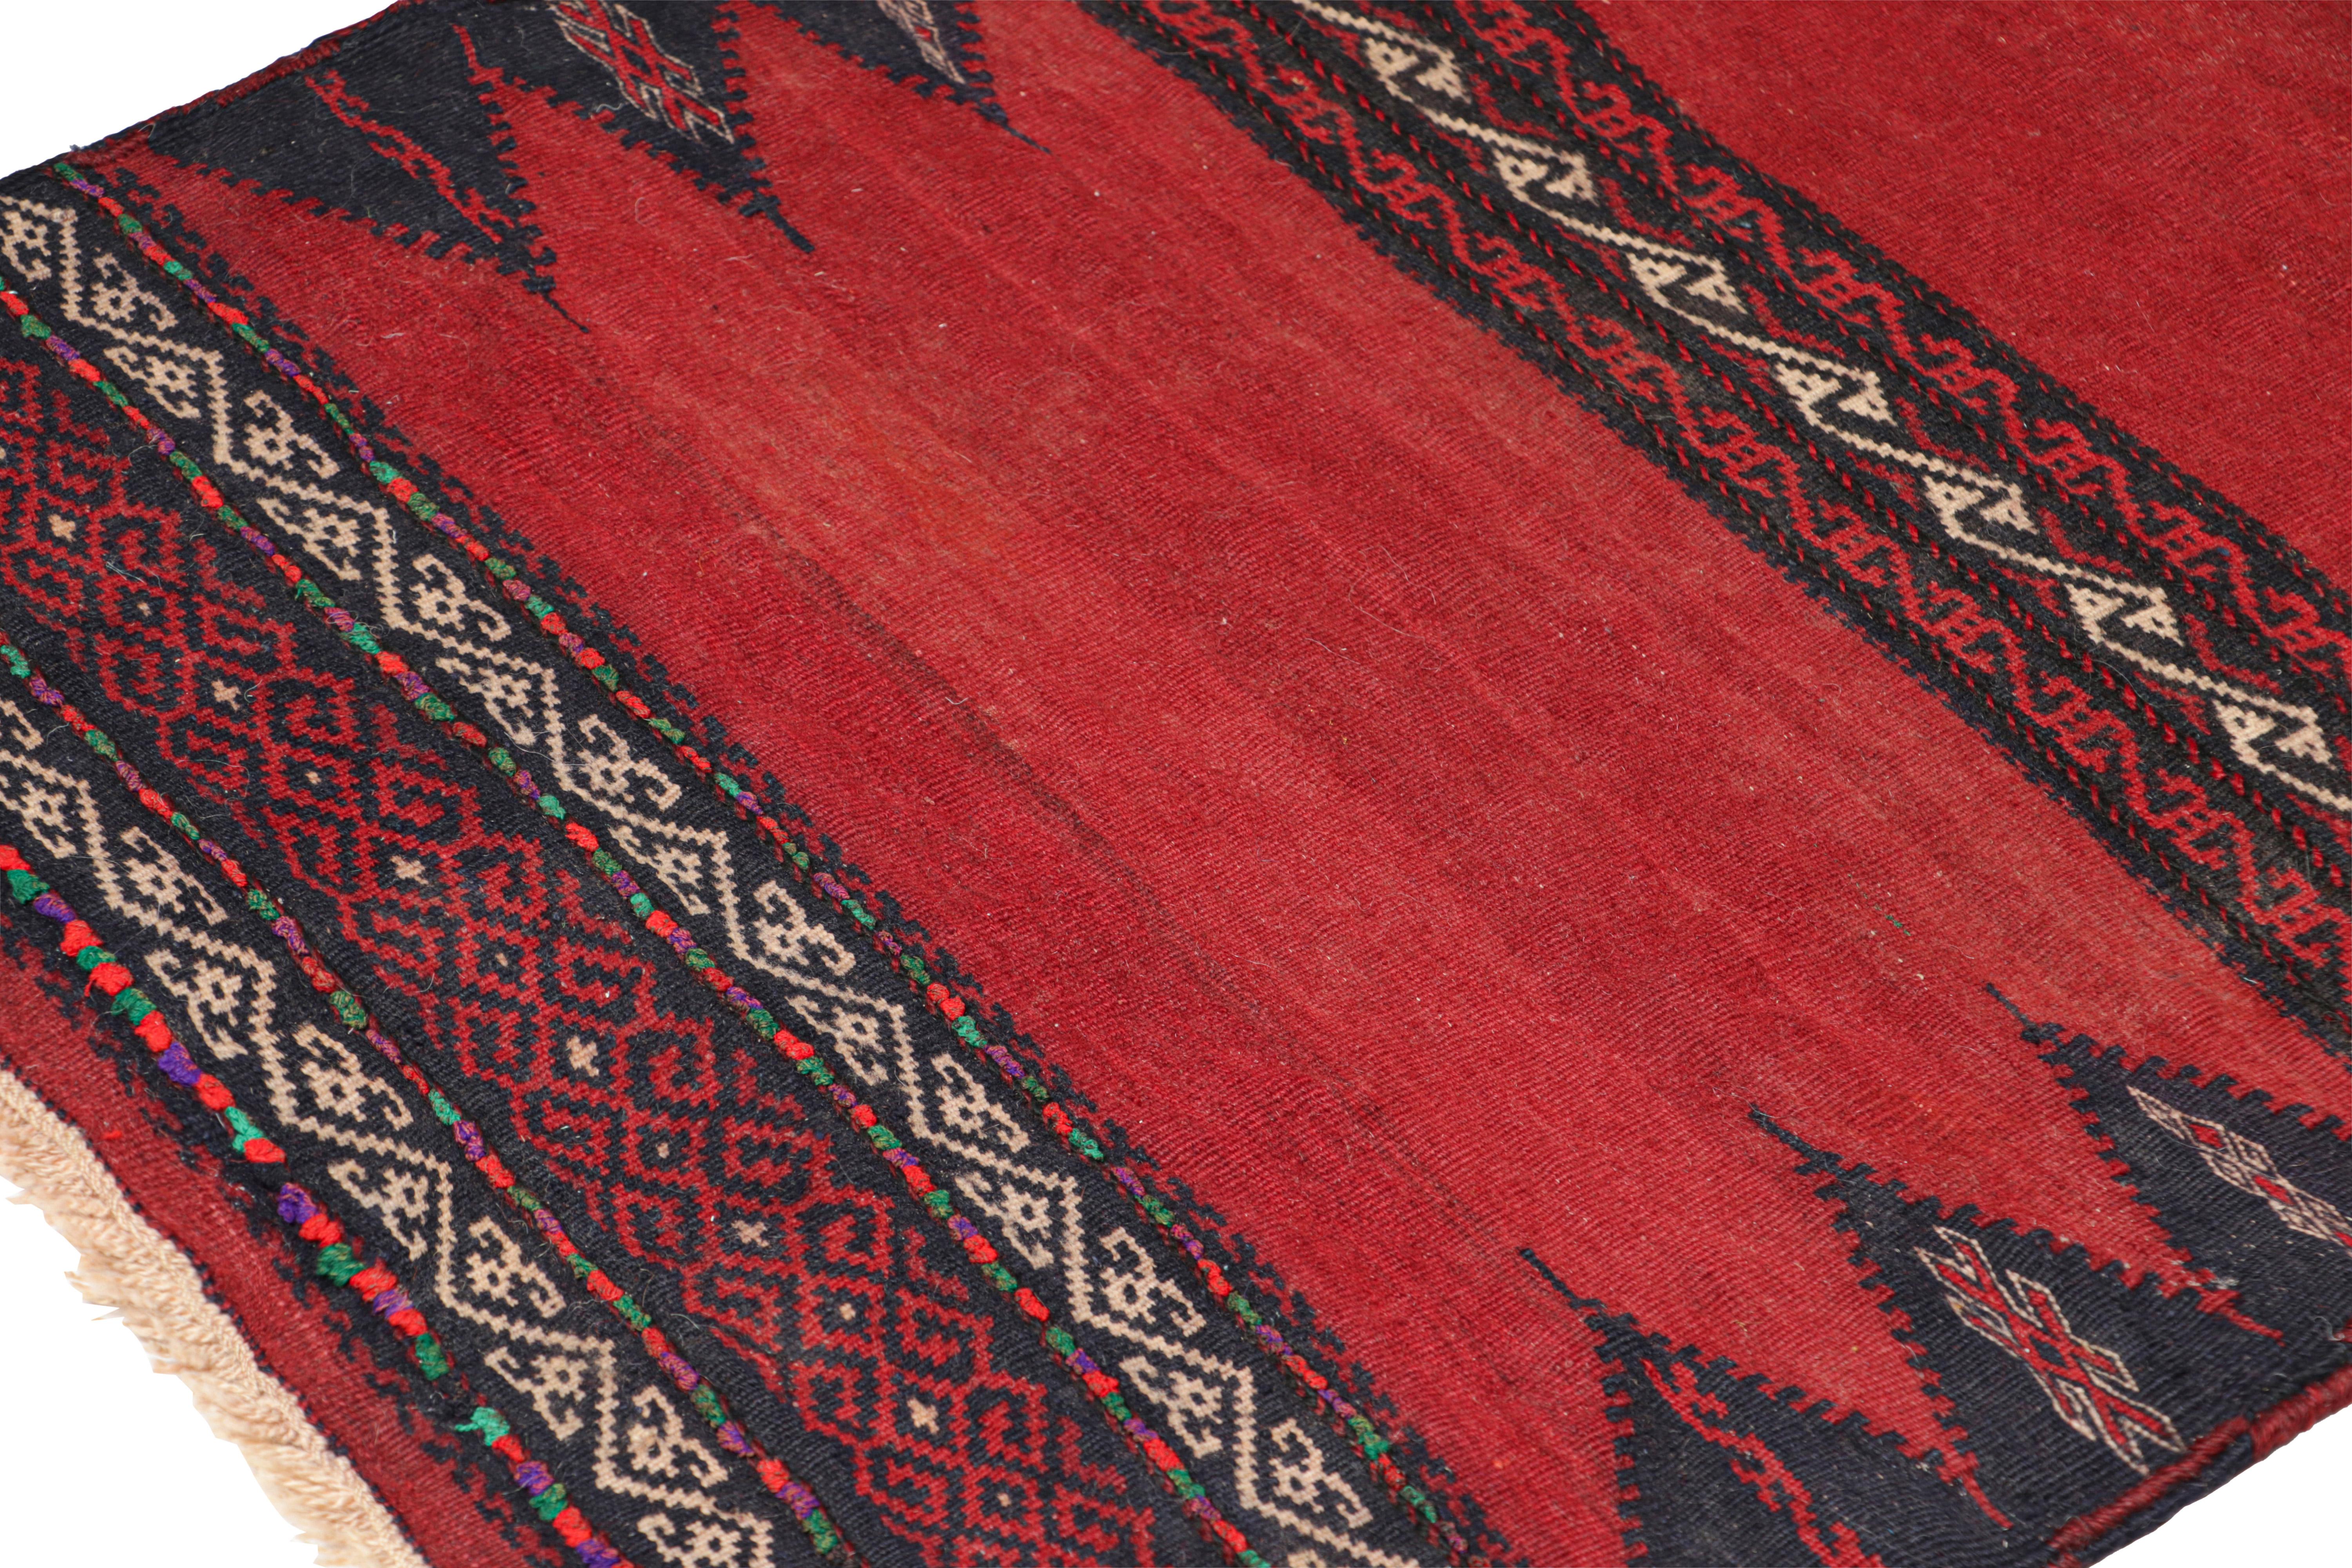 Hand-Woven Vintage Afghan Kilim in Red with Stripes & Geometric Patterns, from Rug & Kilim For Sale